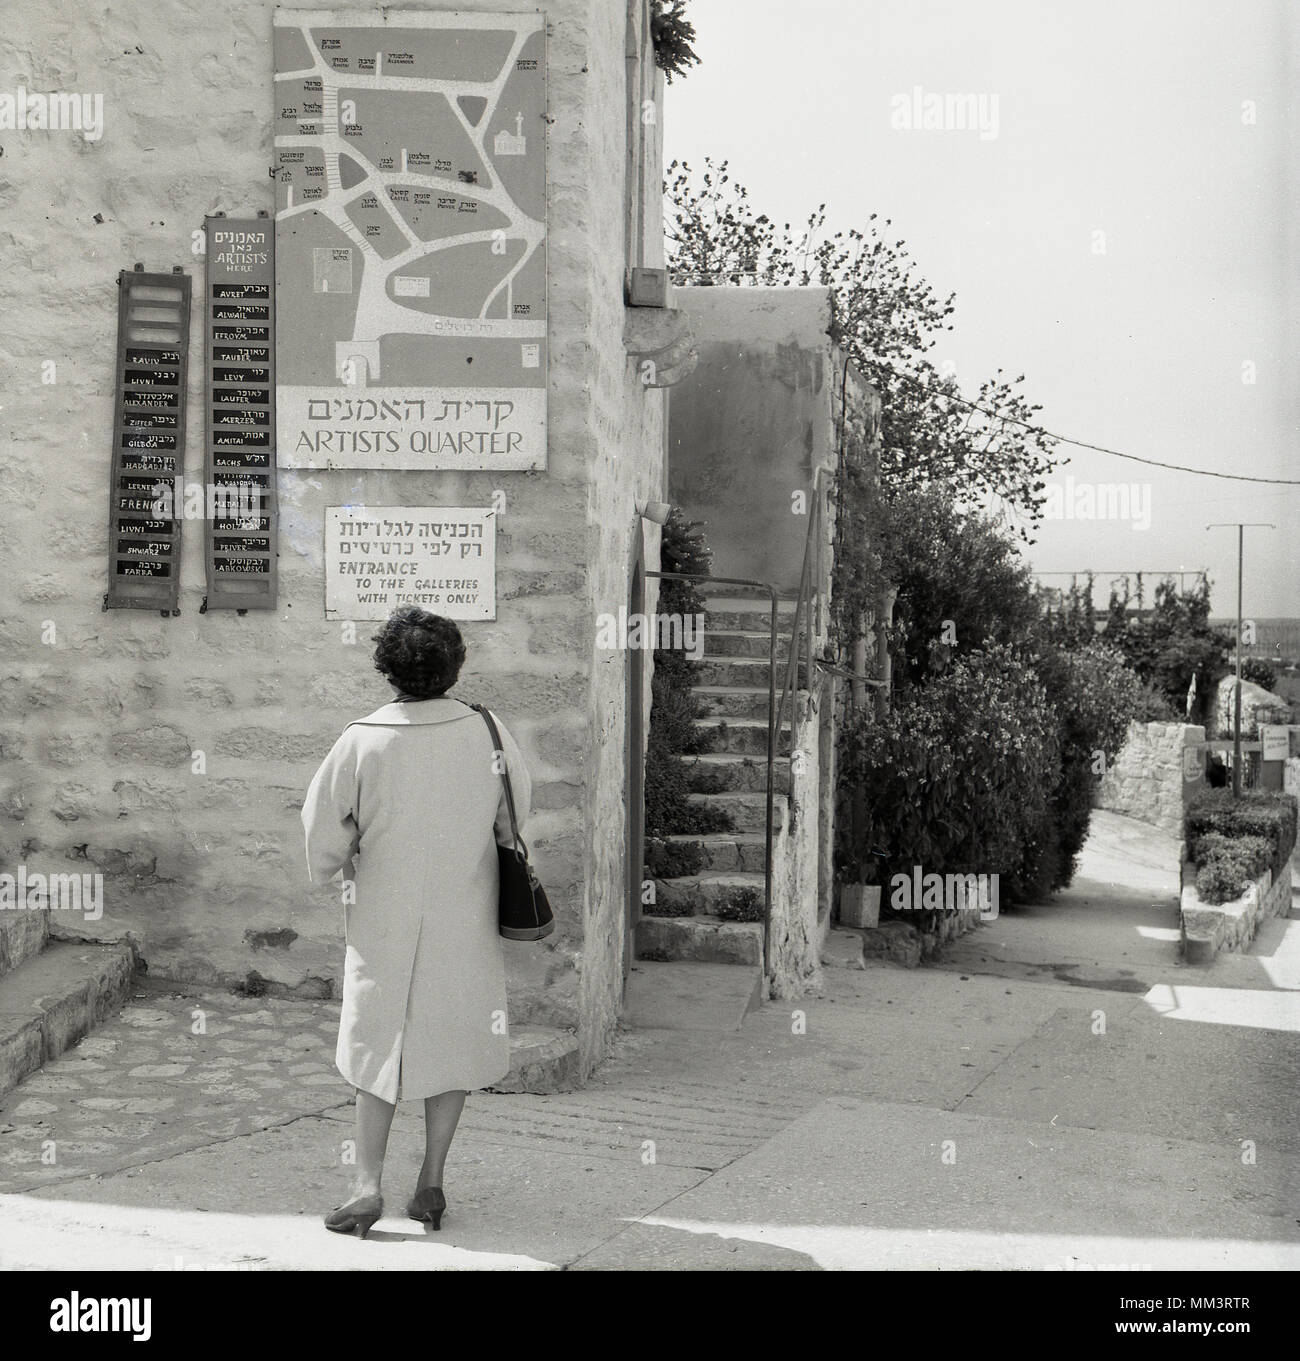 1950s, historical, western lady studies the sign and map on the side on a stone buidling for the Artists Quarter in the old city of Safed (Tzfat), Israel. In the 1950s and 1960s, Safed was known as israel's art capital and its reputation drew artists to the colony established in the Old City. Stock Photo